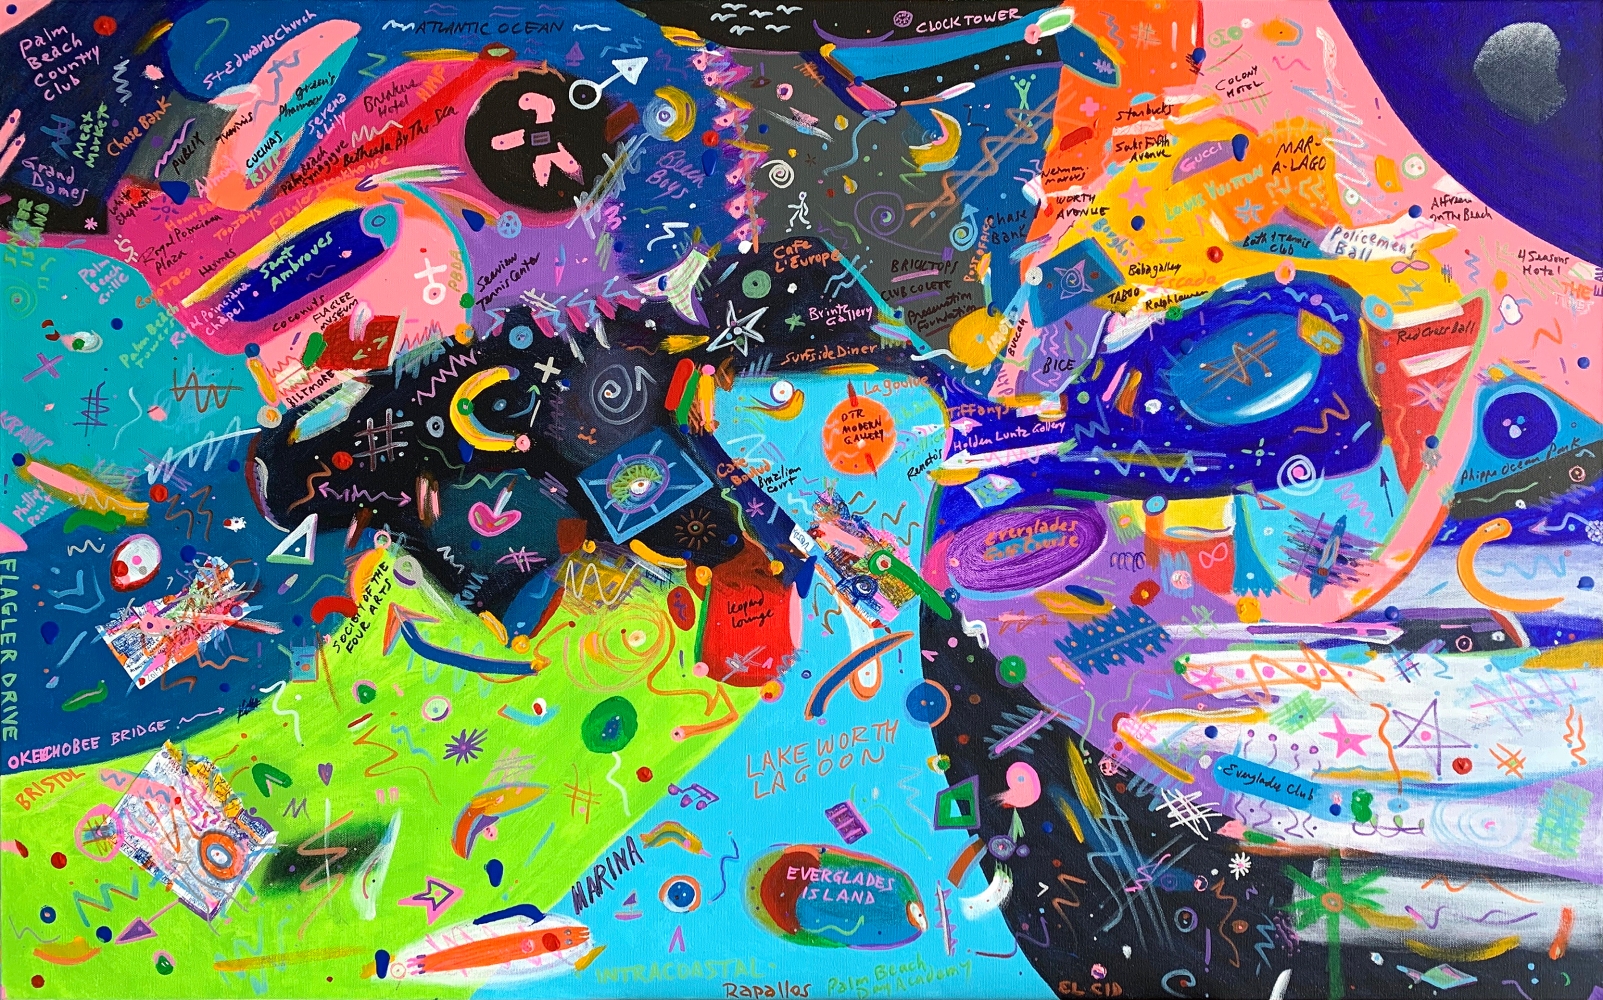 Ron Burkhardt, Palm Beach Pandemonium, 2020, Acrylic, Collage, Ink and Oil on canvas, 30 x 48 inches, Notism art for sale